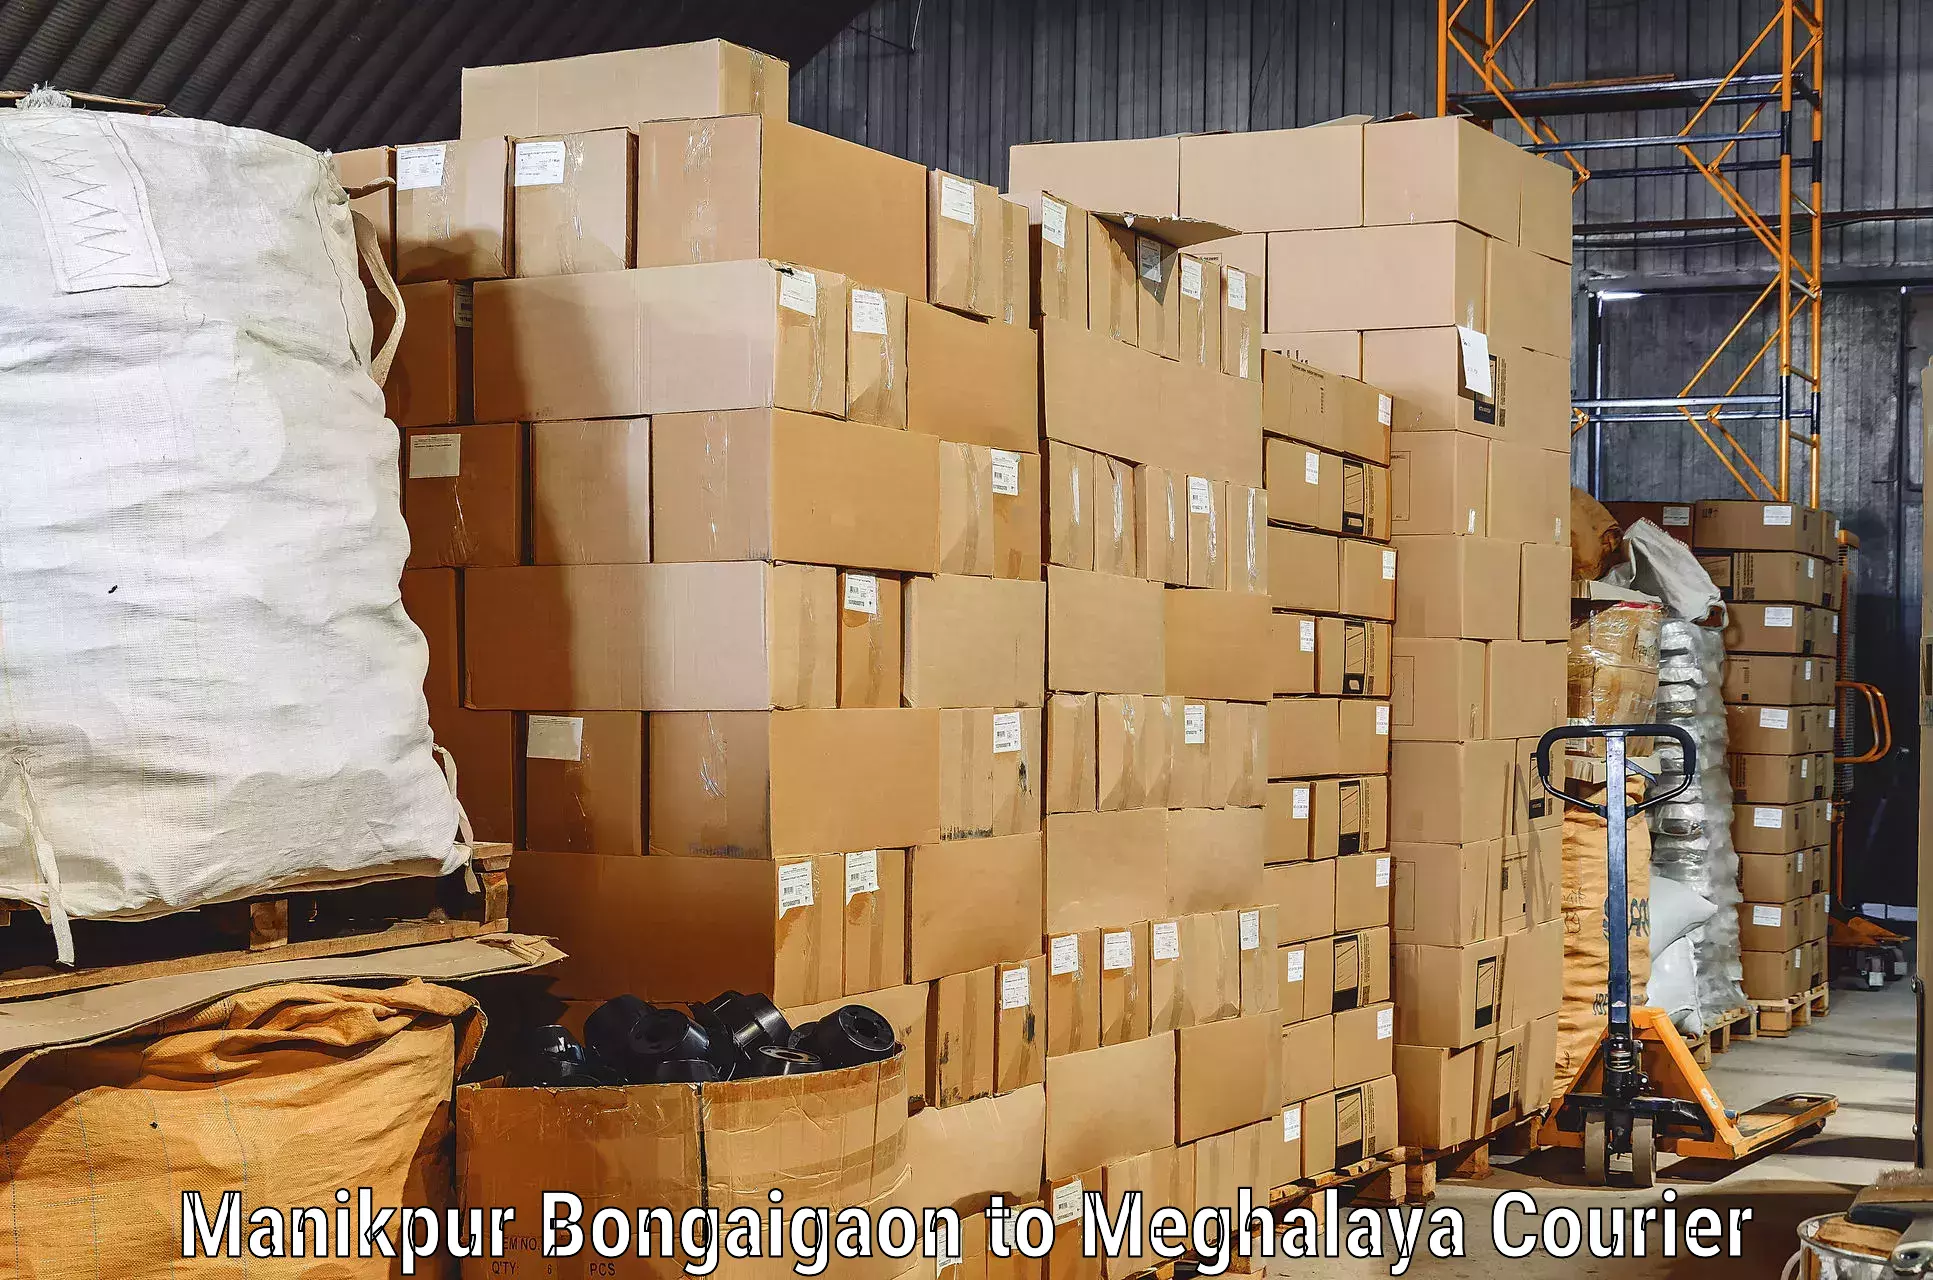 Quality relocation assistance Manikpur Bongaigaon to South Garo Hills